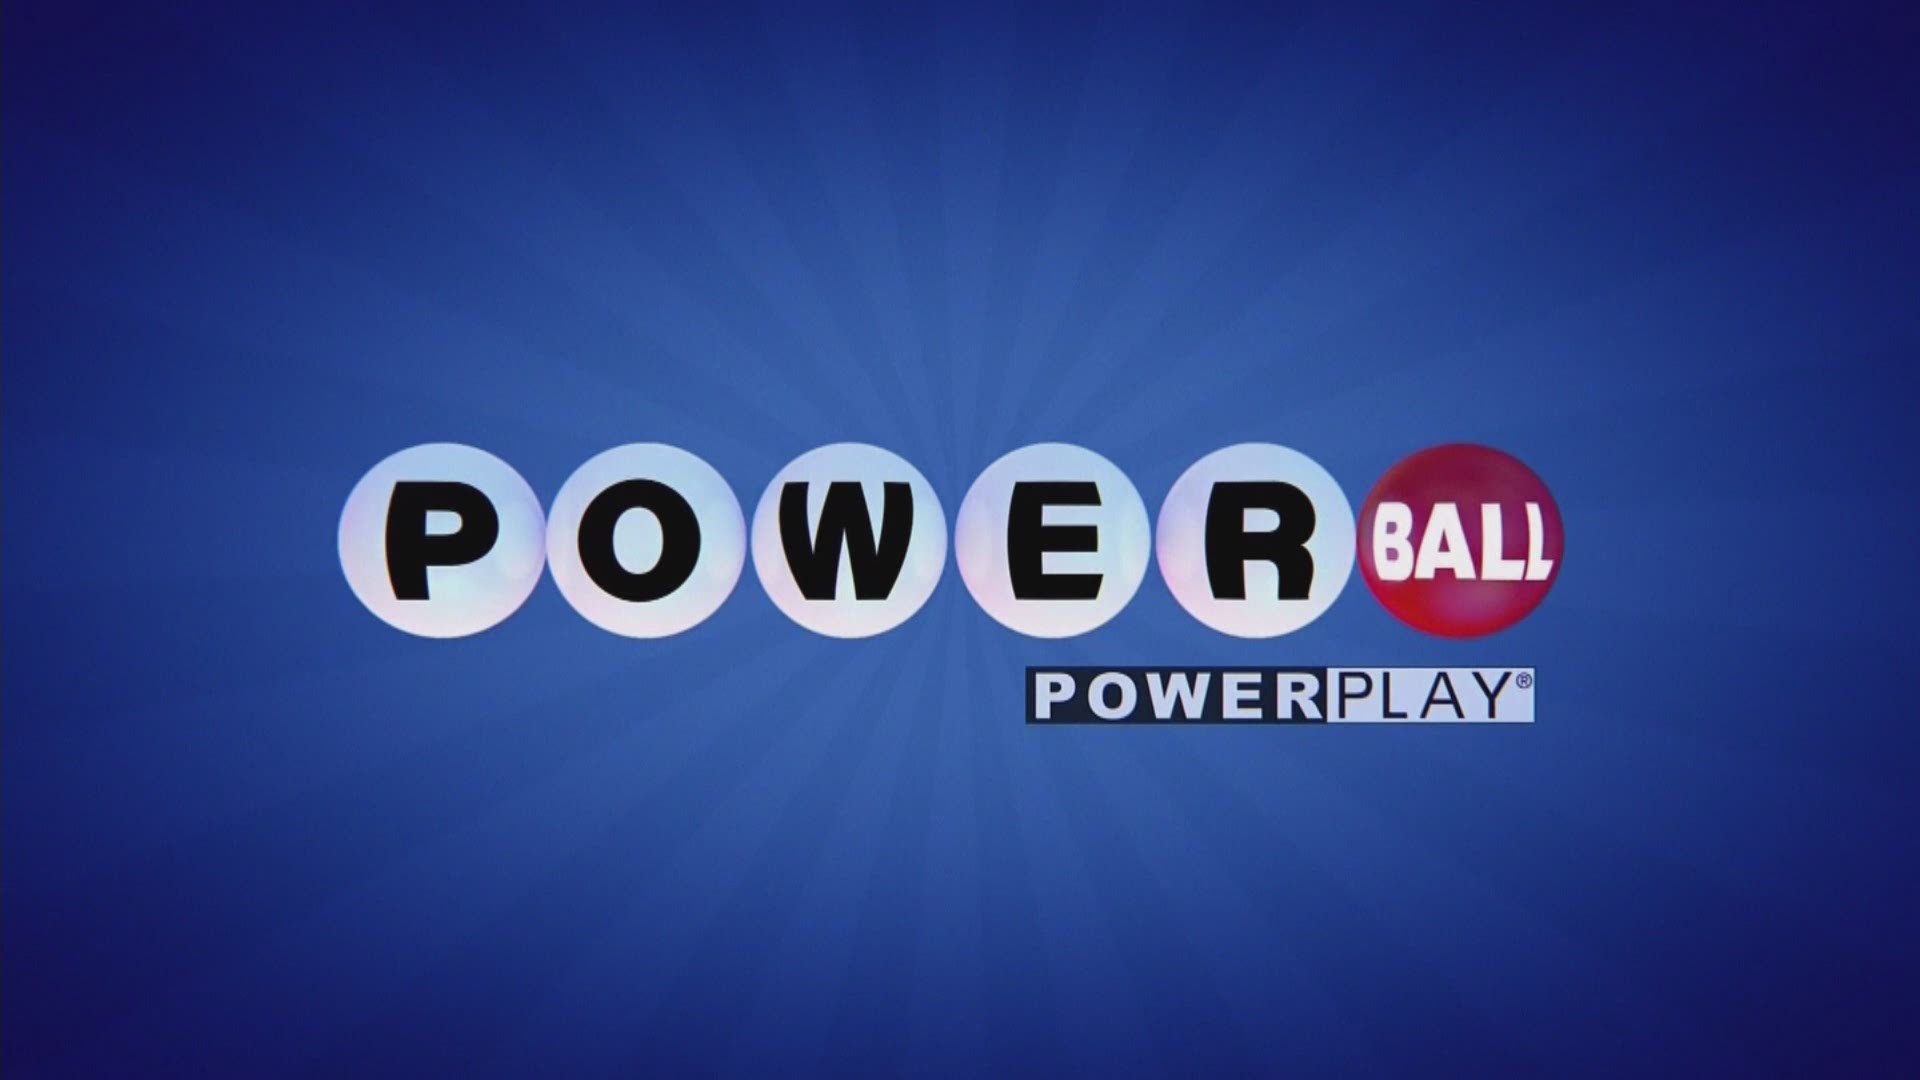 Powerball drawing for Wednesday, Jan. 9, 2019. The estimated jackpot is $81.6 million.